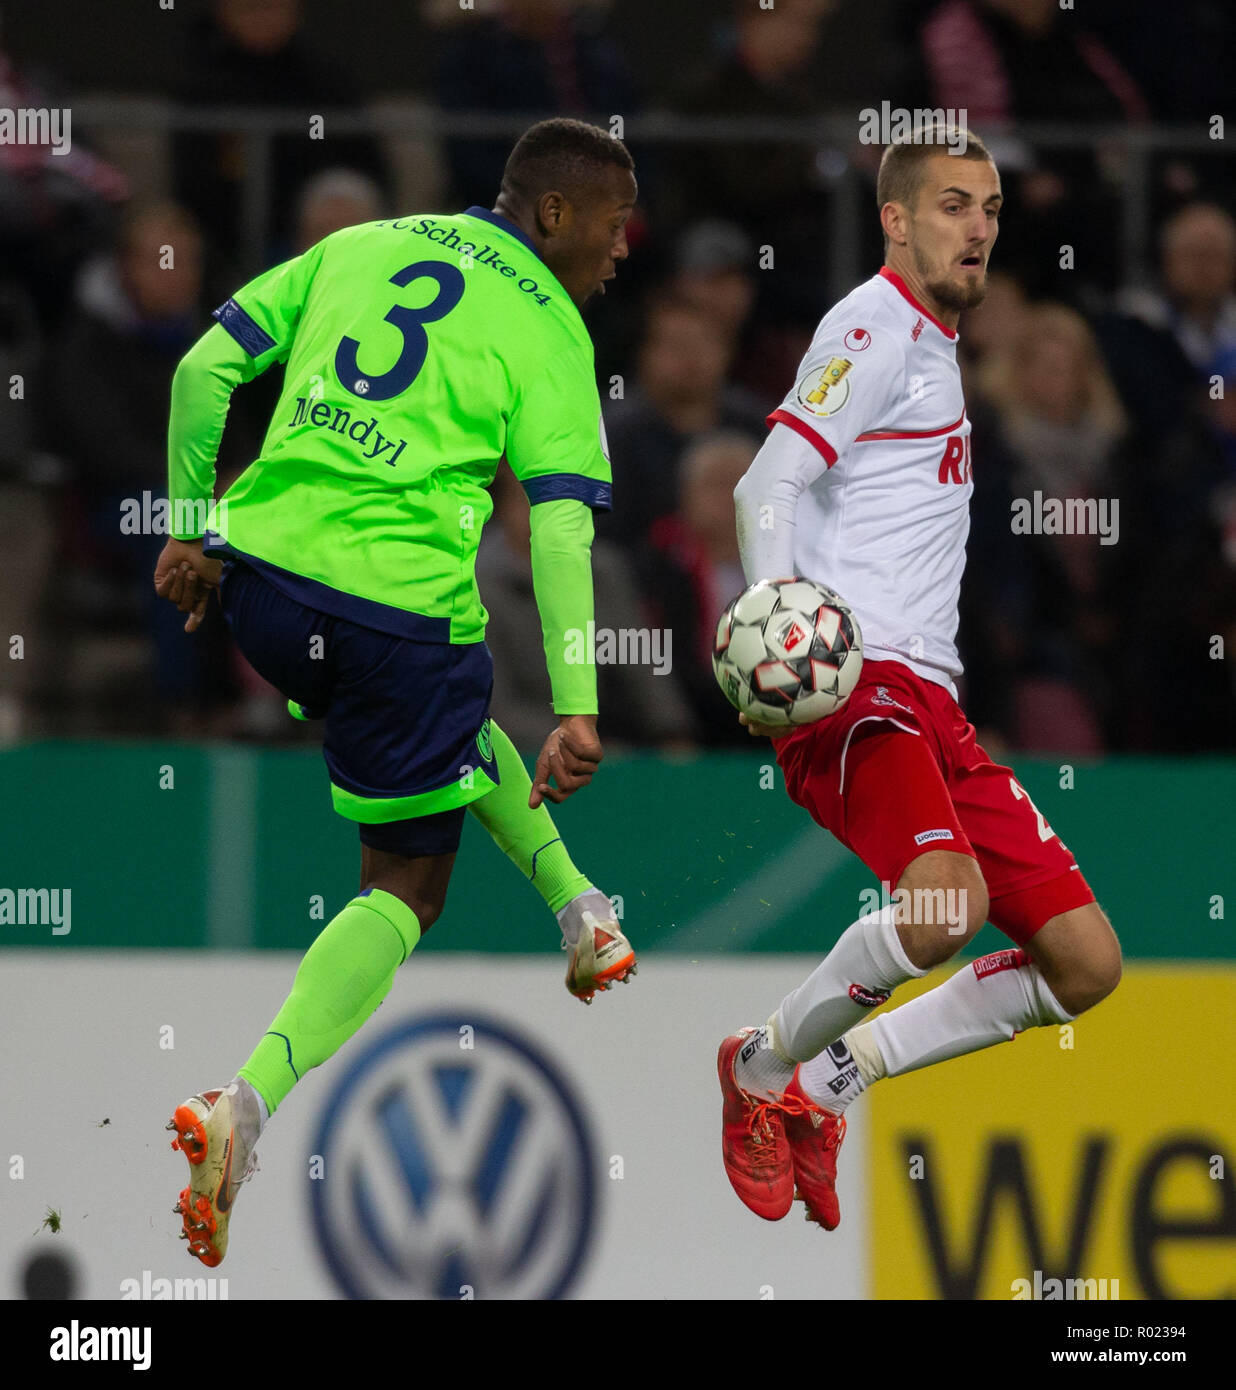 Cologne, Germany October 31 2018, DFB Pokal, FC Koeln - FC Schalke 04: Hamza Mendyl (S04), Dominick Drexler (Koeln) in competition.                 Credit: Juergen Schwarz/Alamy Live News    DFB REGULATIONS PROHIBIT ANY USE OF PHOTOGRAPHS AS IMAGE SEQUENCES AND/OR QUASI-VIDEO Credit: Juergen Schwarz/Alamy Live News Stock Photo